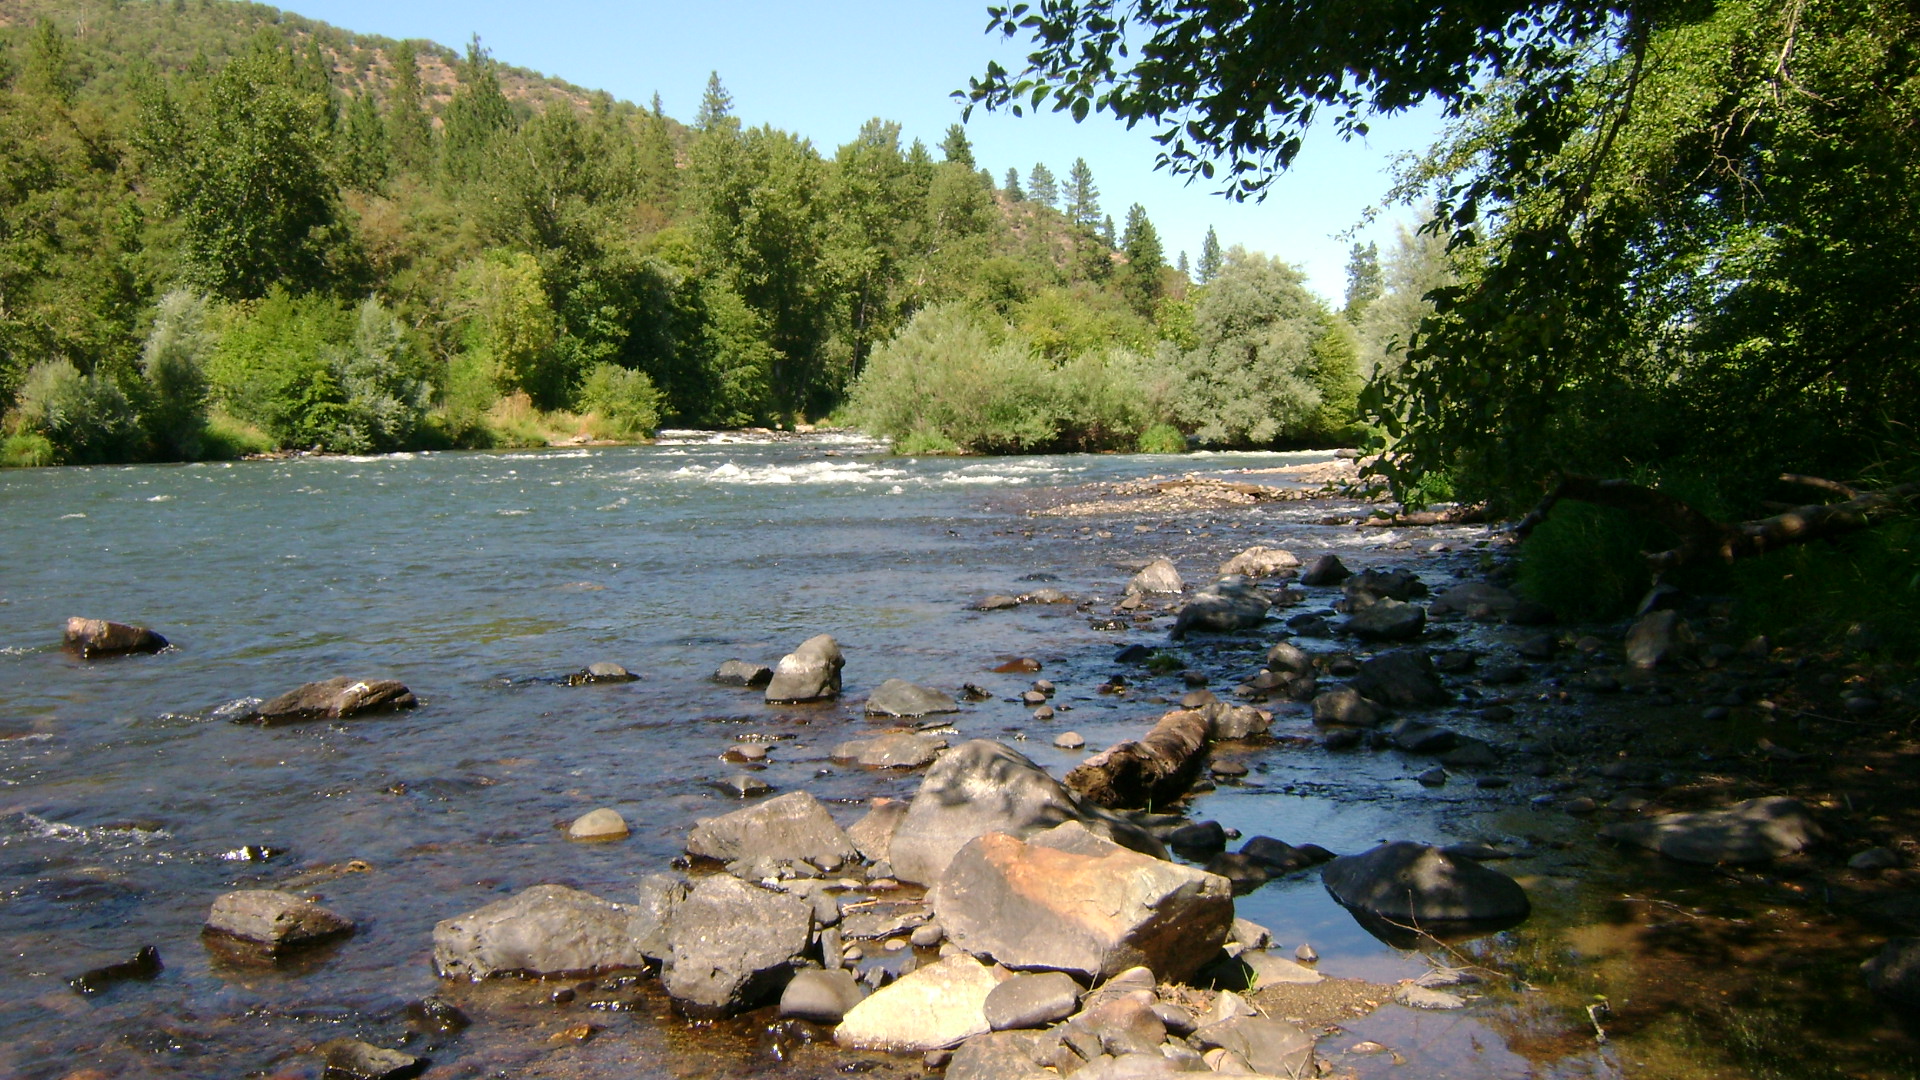  gold dredging opportunities on the Rogue River in southern Oregon